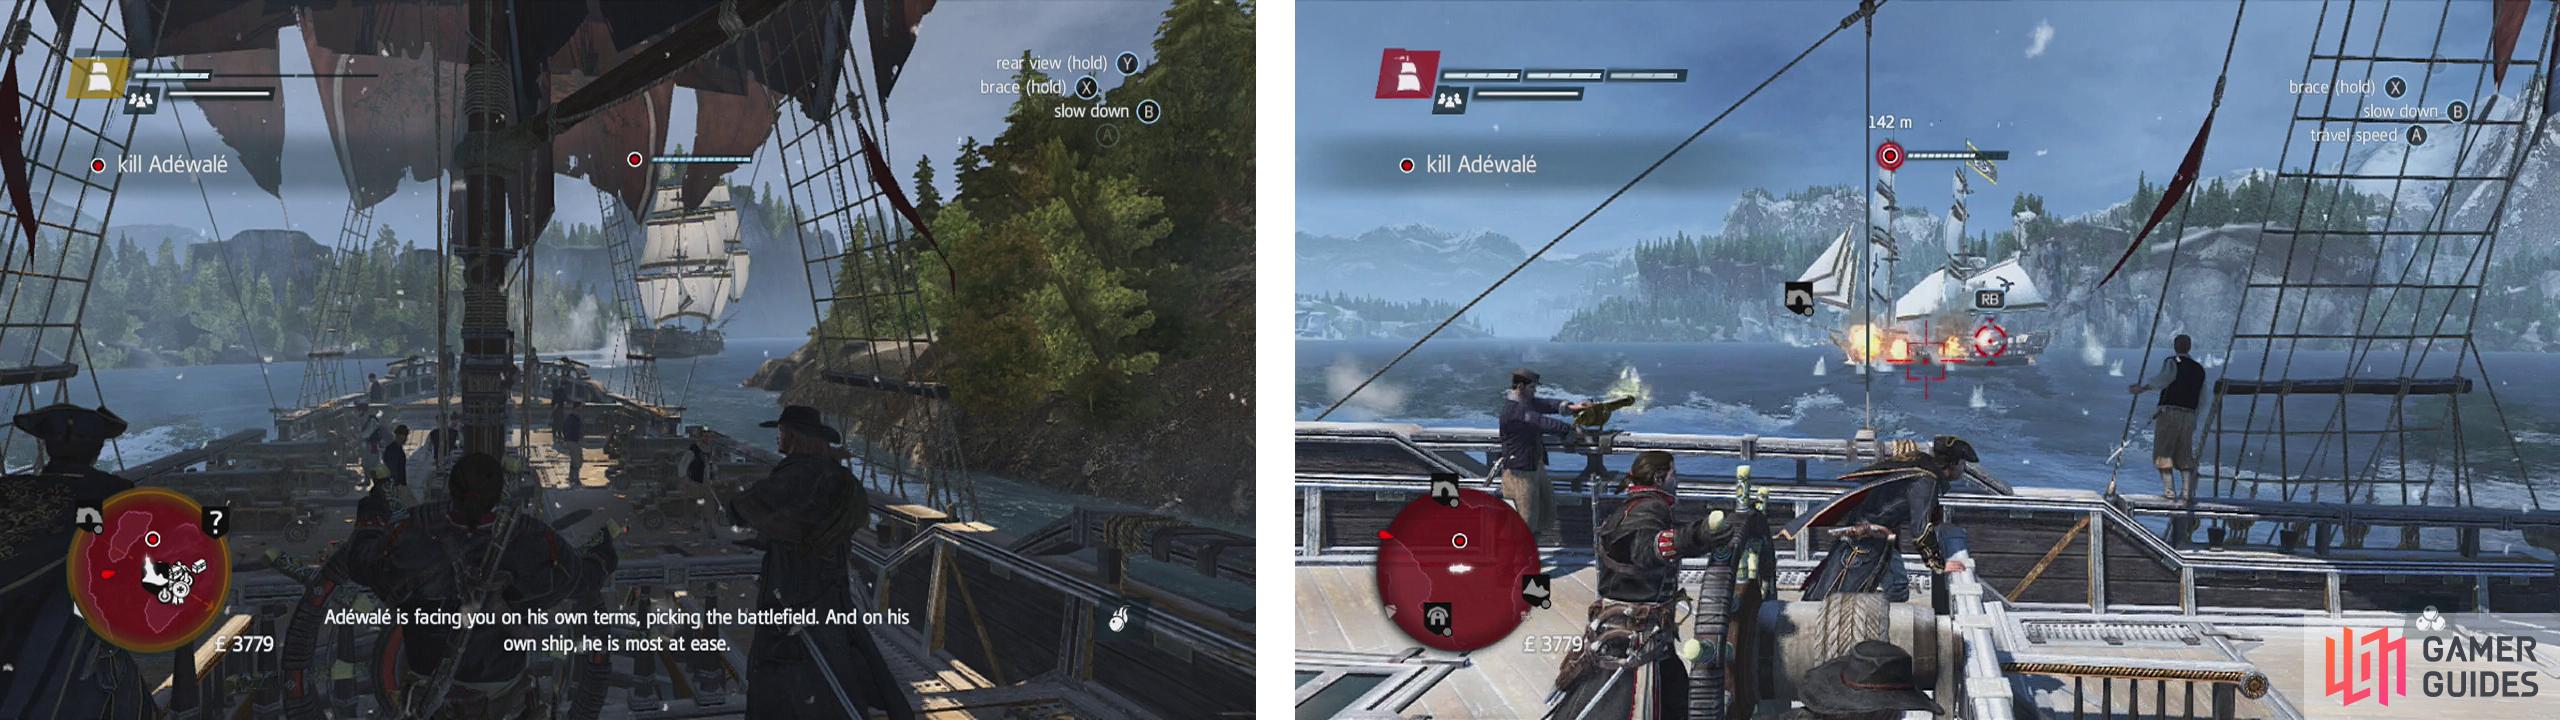 Follow the target ship whilst avoiding mortars (left) and when you have it cornered, take the target down (right).